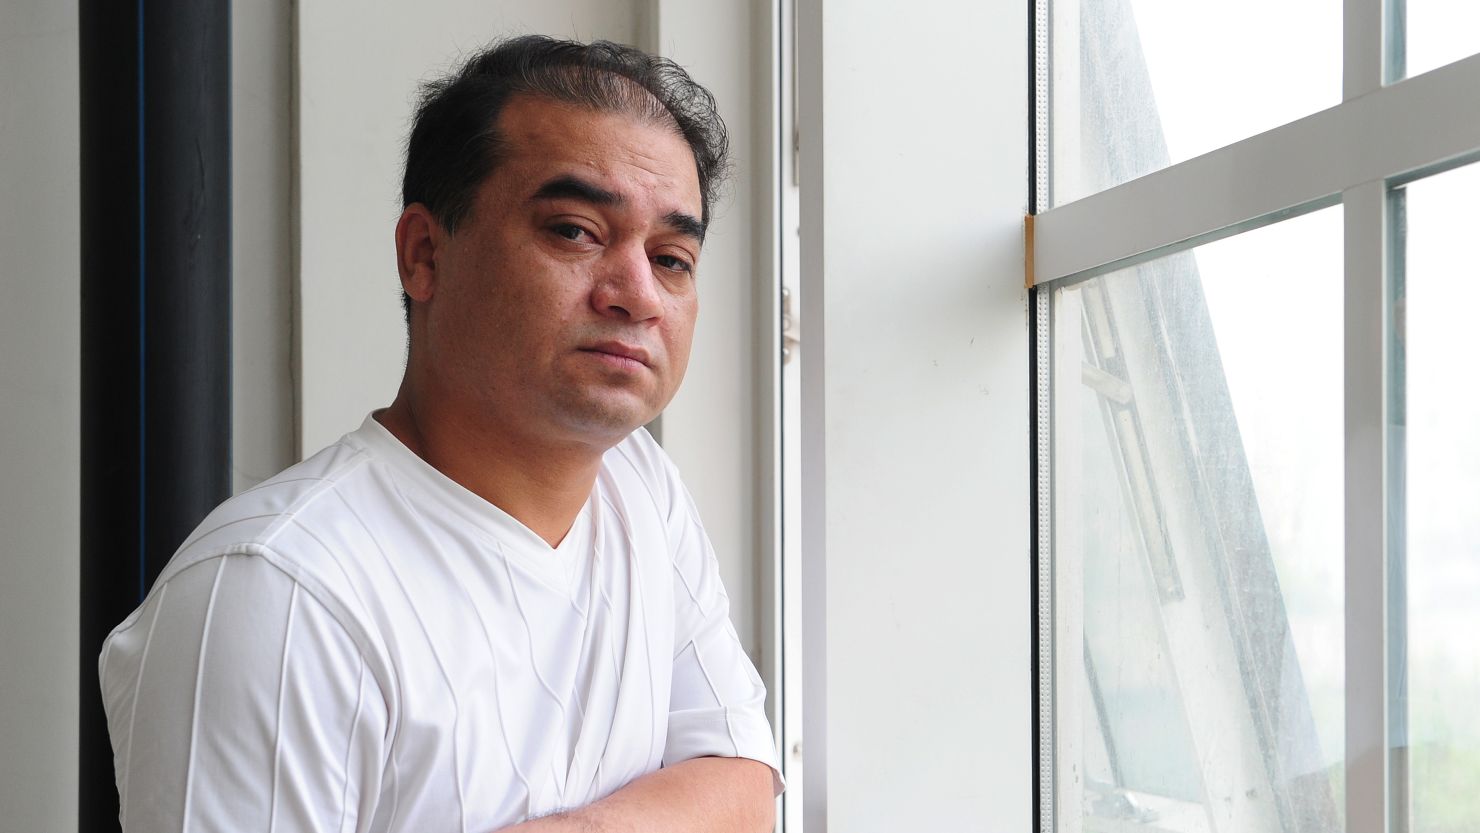 Ilham Tohti, pictured here in June 12, 2010, was arrested and taken to Urumqi in January this year.